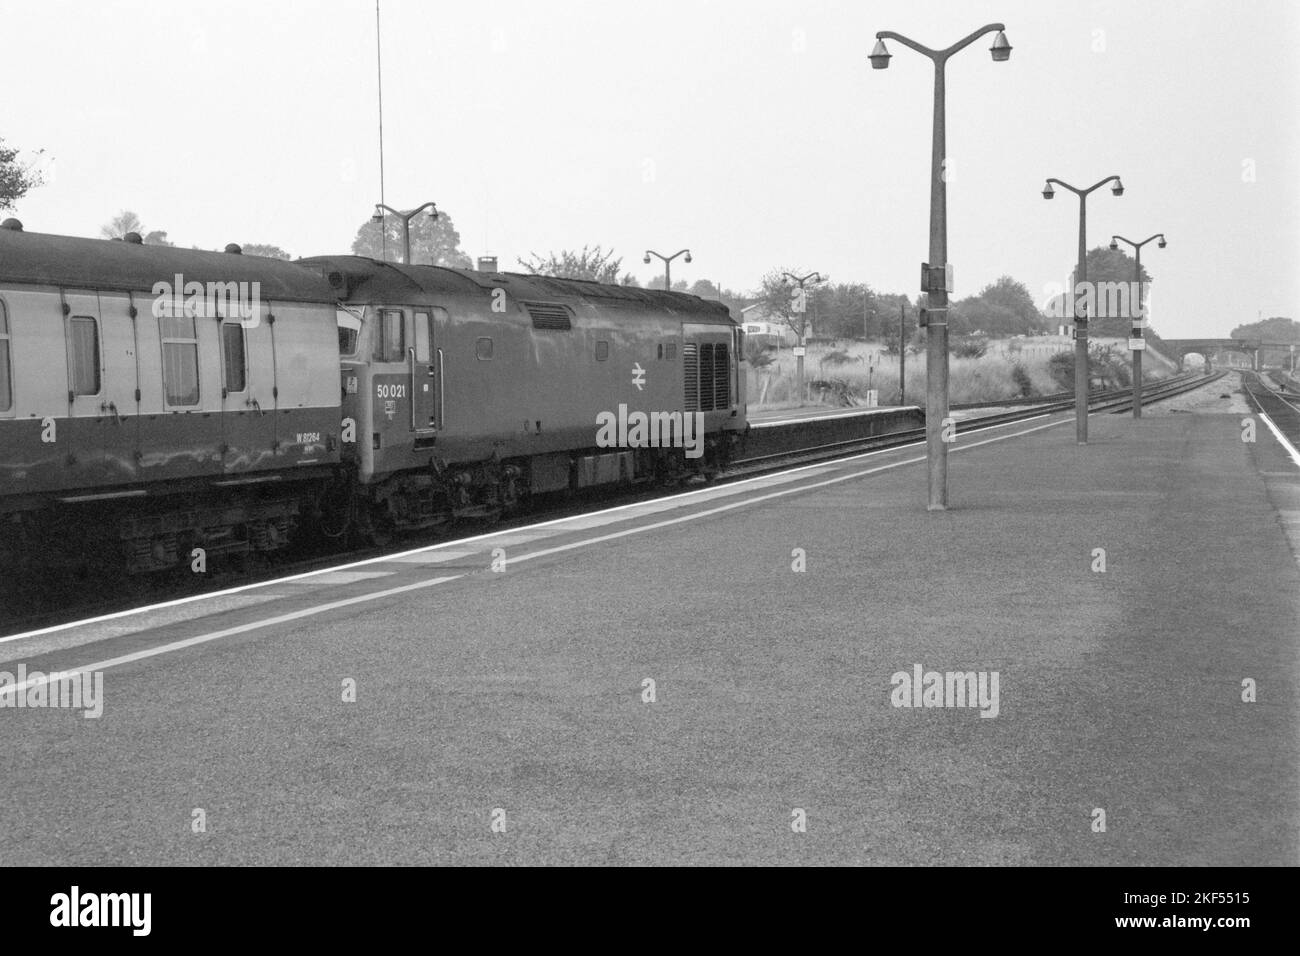 original british rail diesel locomotive class 50 number 50021 on passenger service didcot late 1970s early 1980s Stock Photo